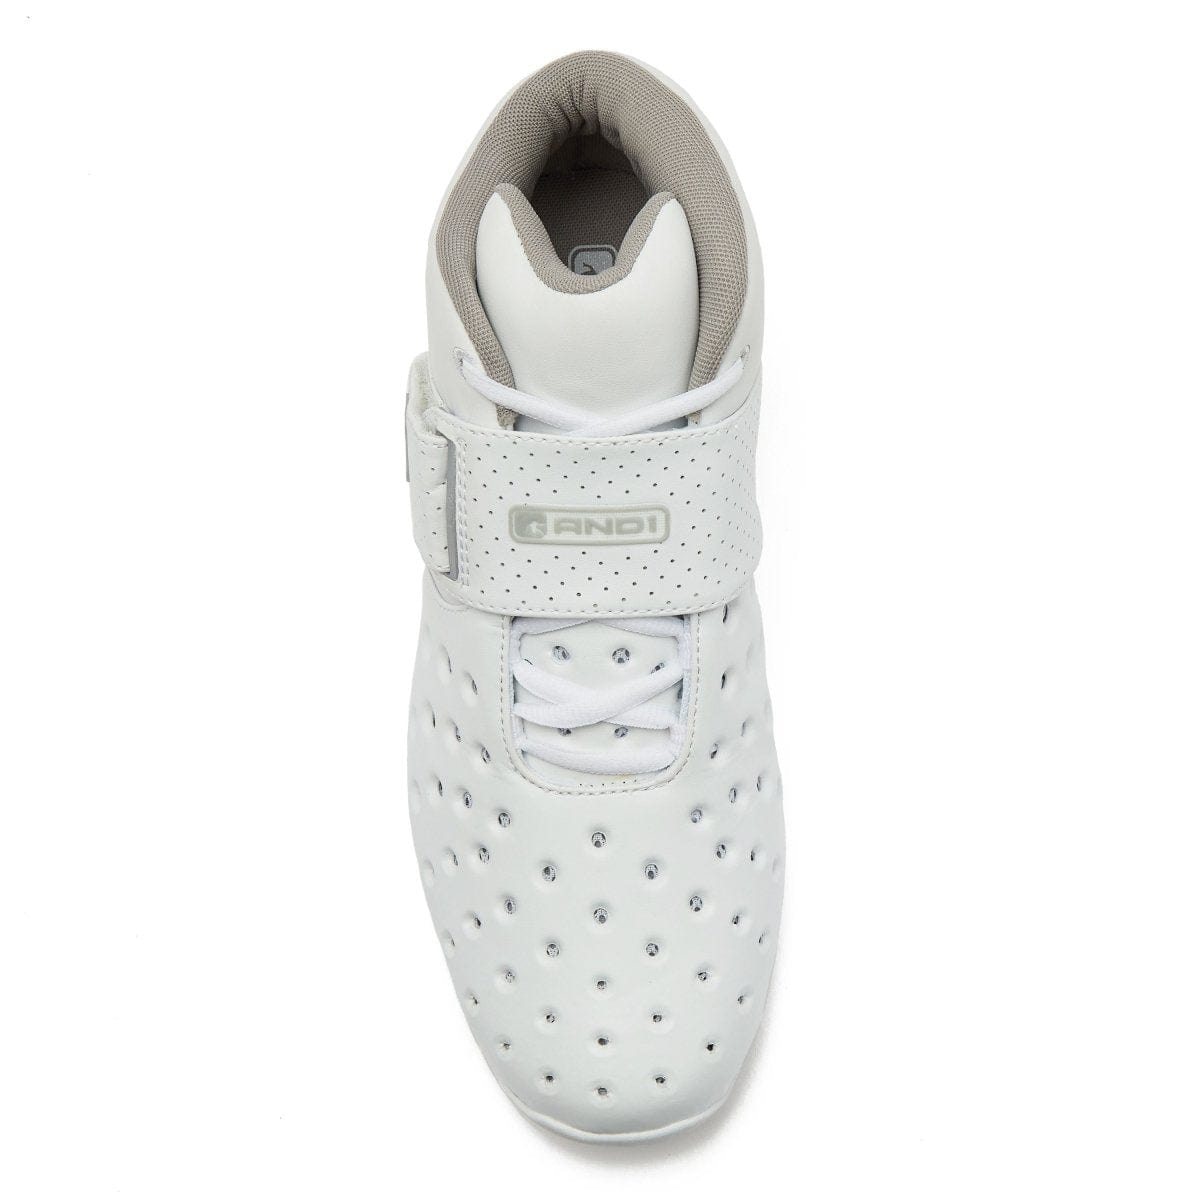 AND-1 AND-1 MEN'S CHOSE ONE TRIPLE WHITE BASKETBALL SHOES - INSPORT